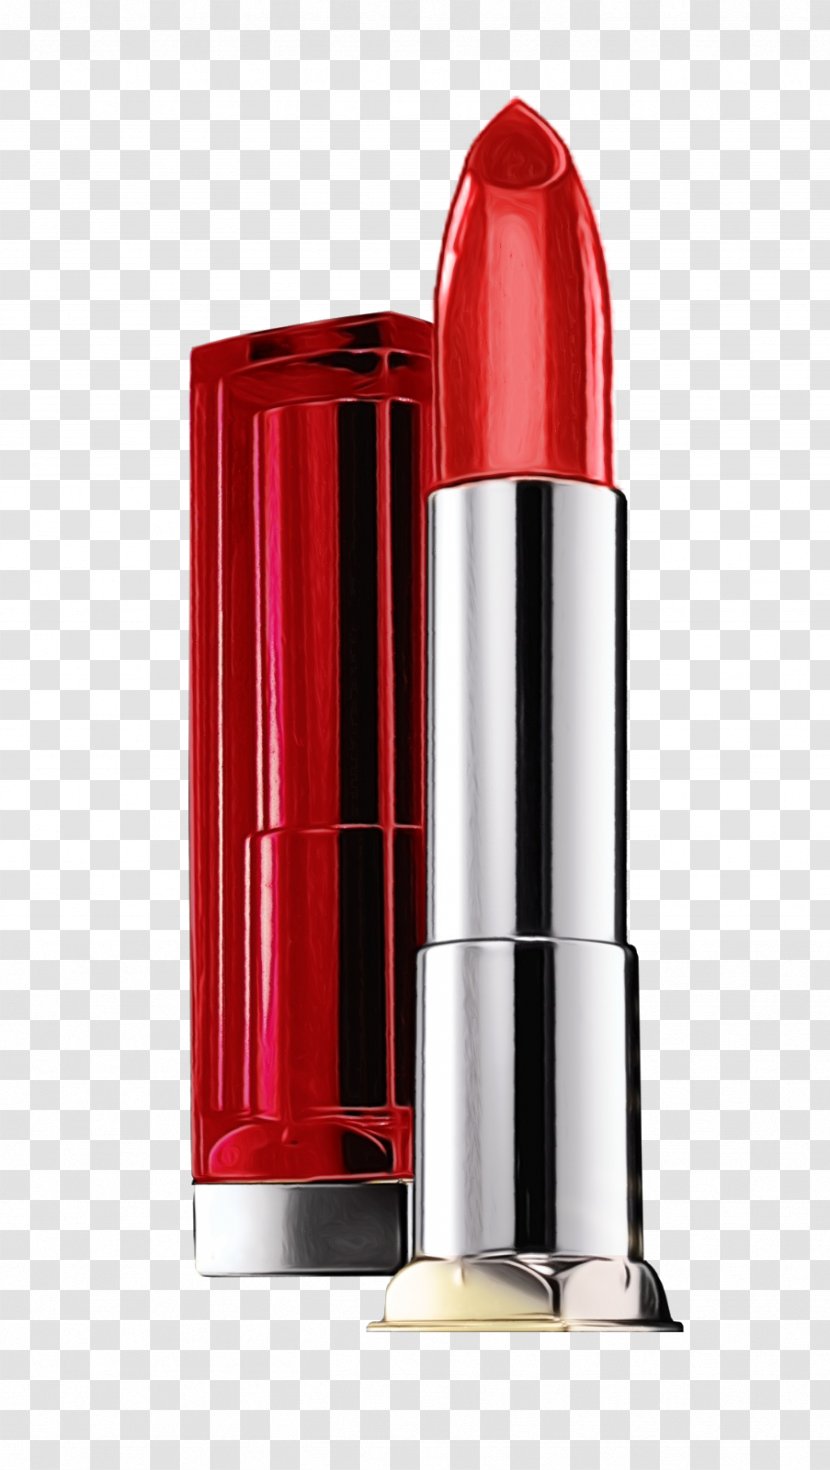 Red Lipstick Beauty Cosmetics Lip Care - Ammunition Material Property Transparent PNG